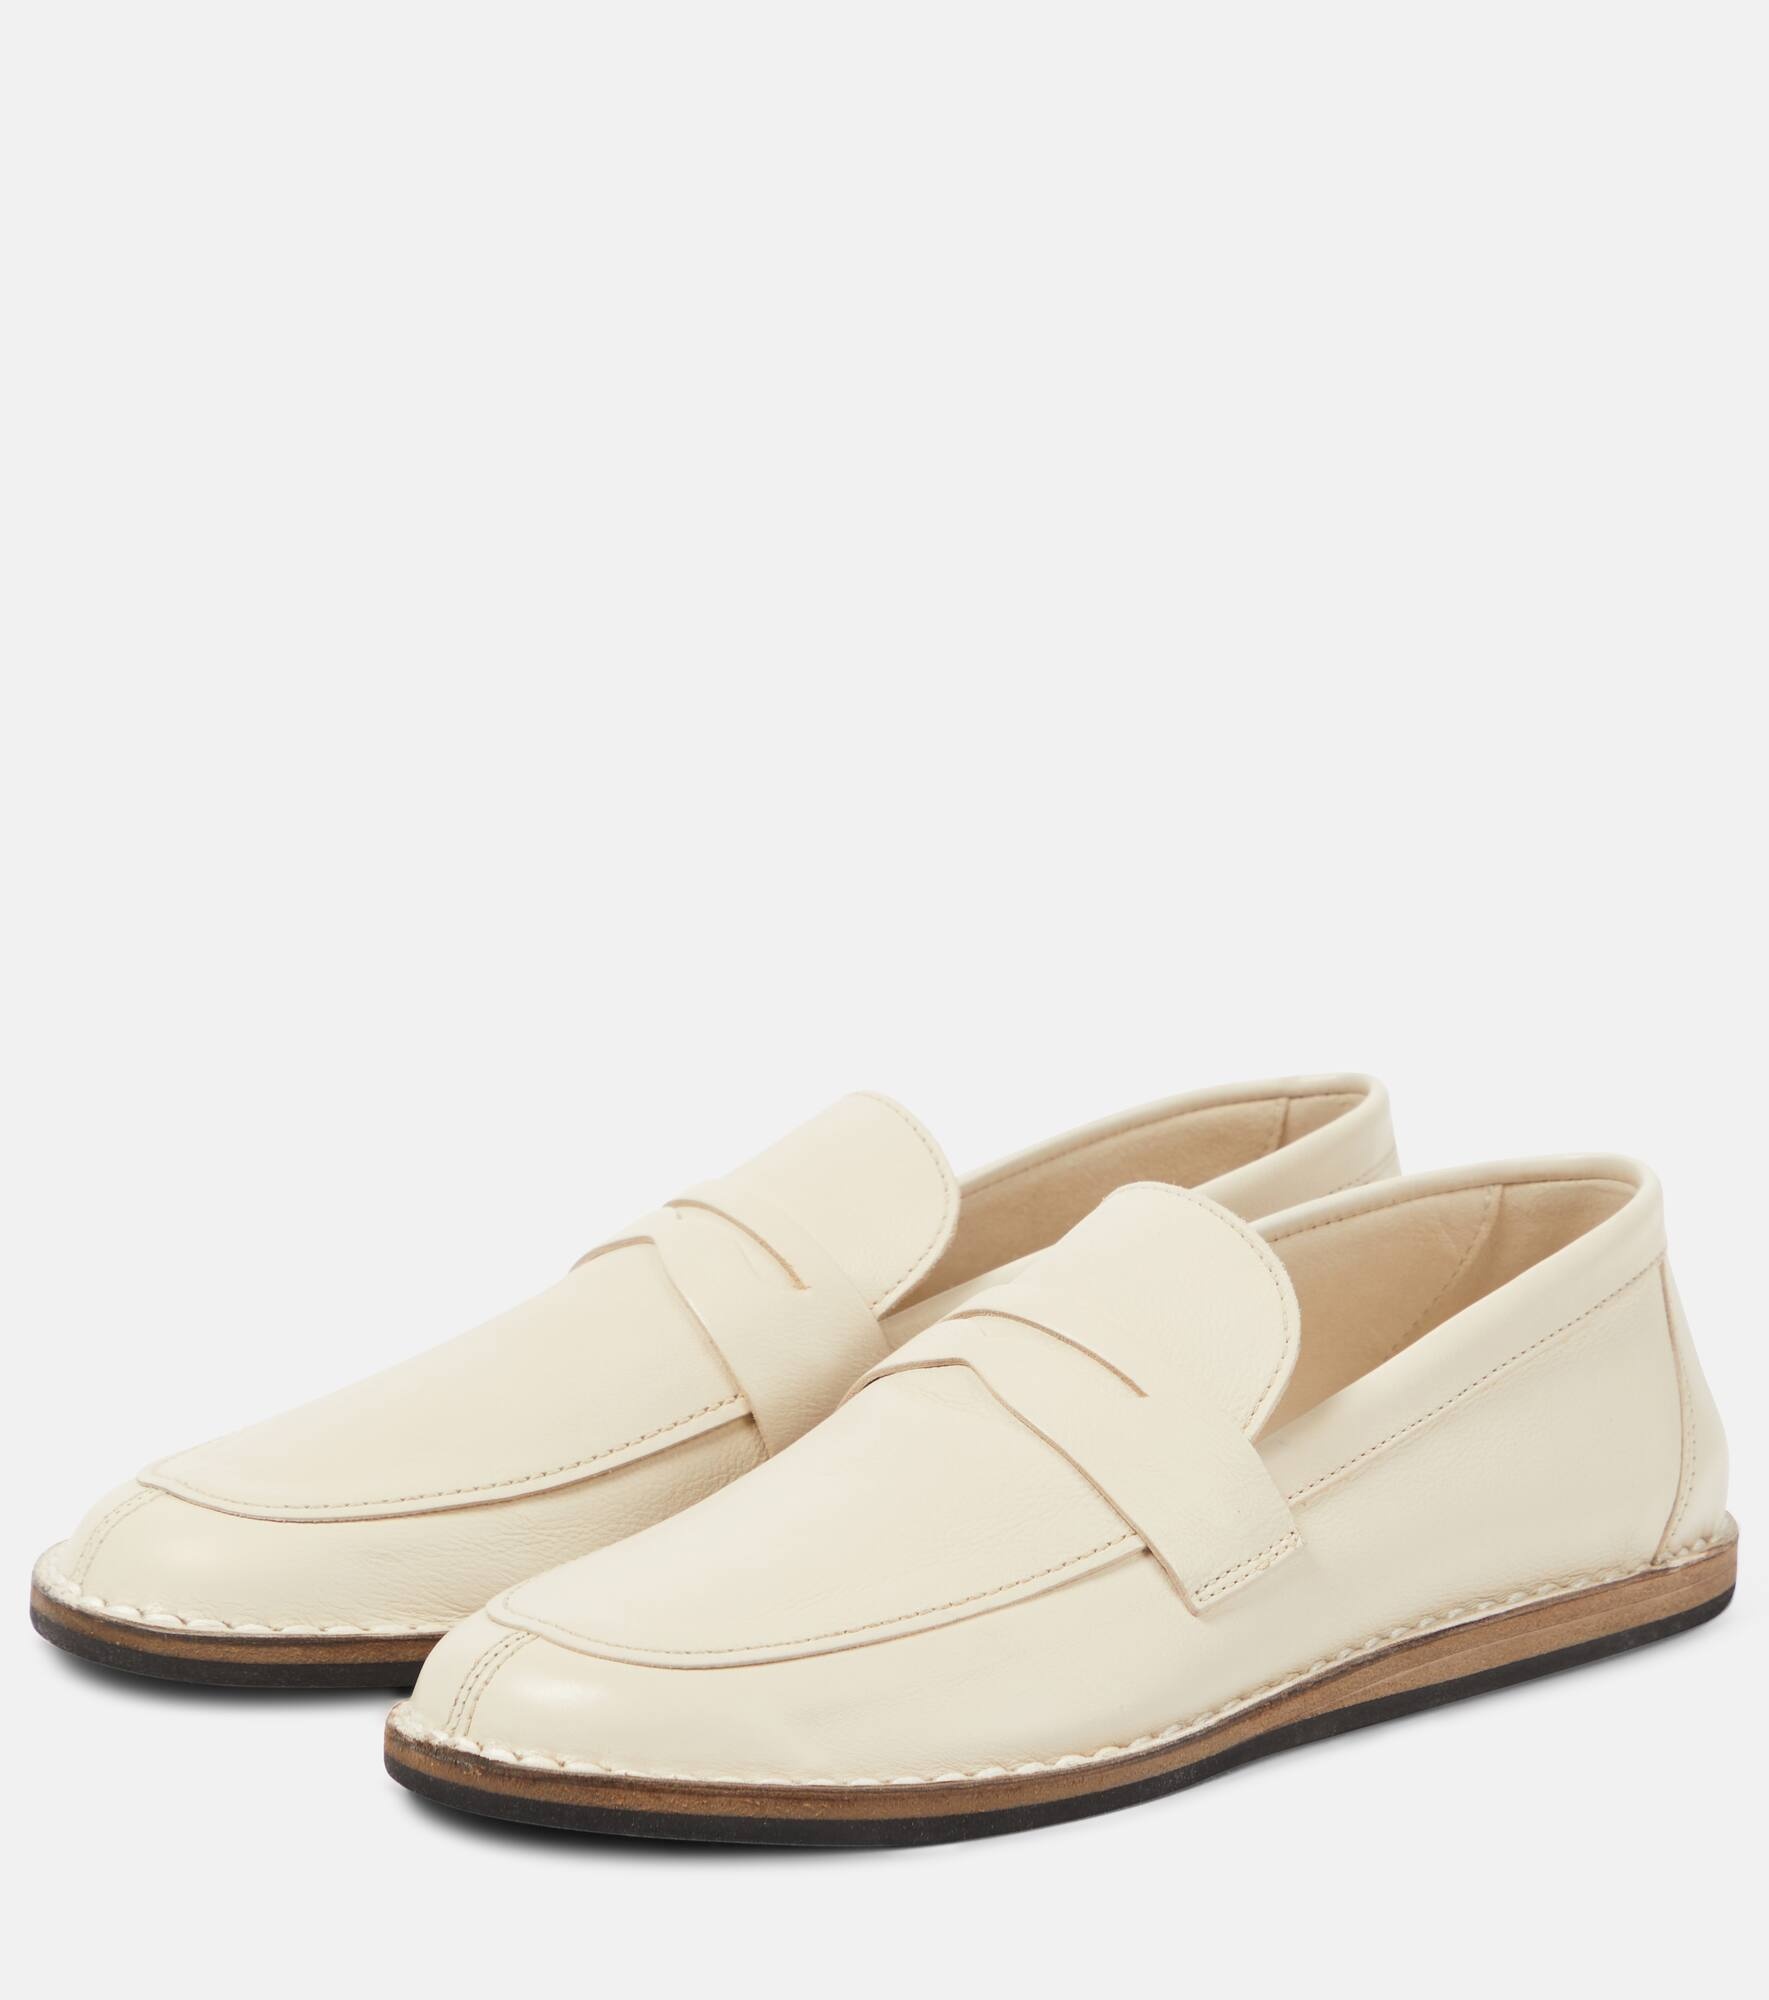 Cary leather penny loafers - 5